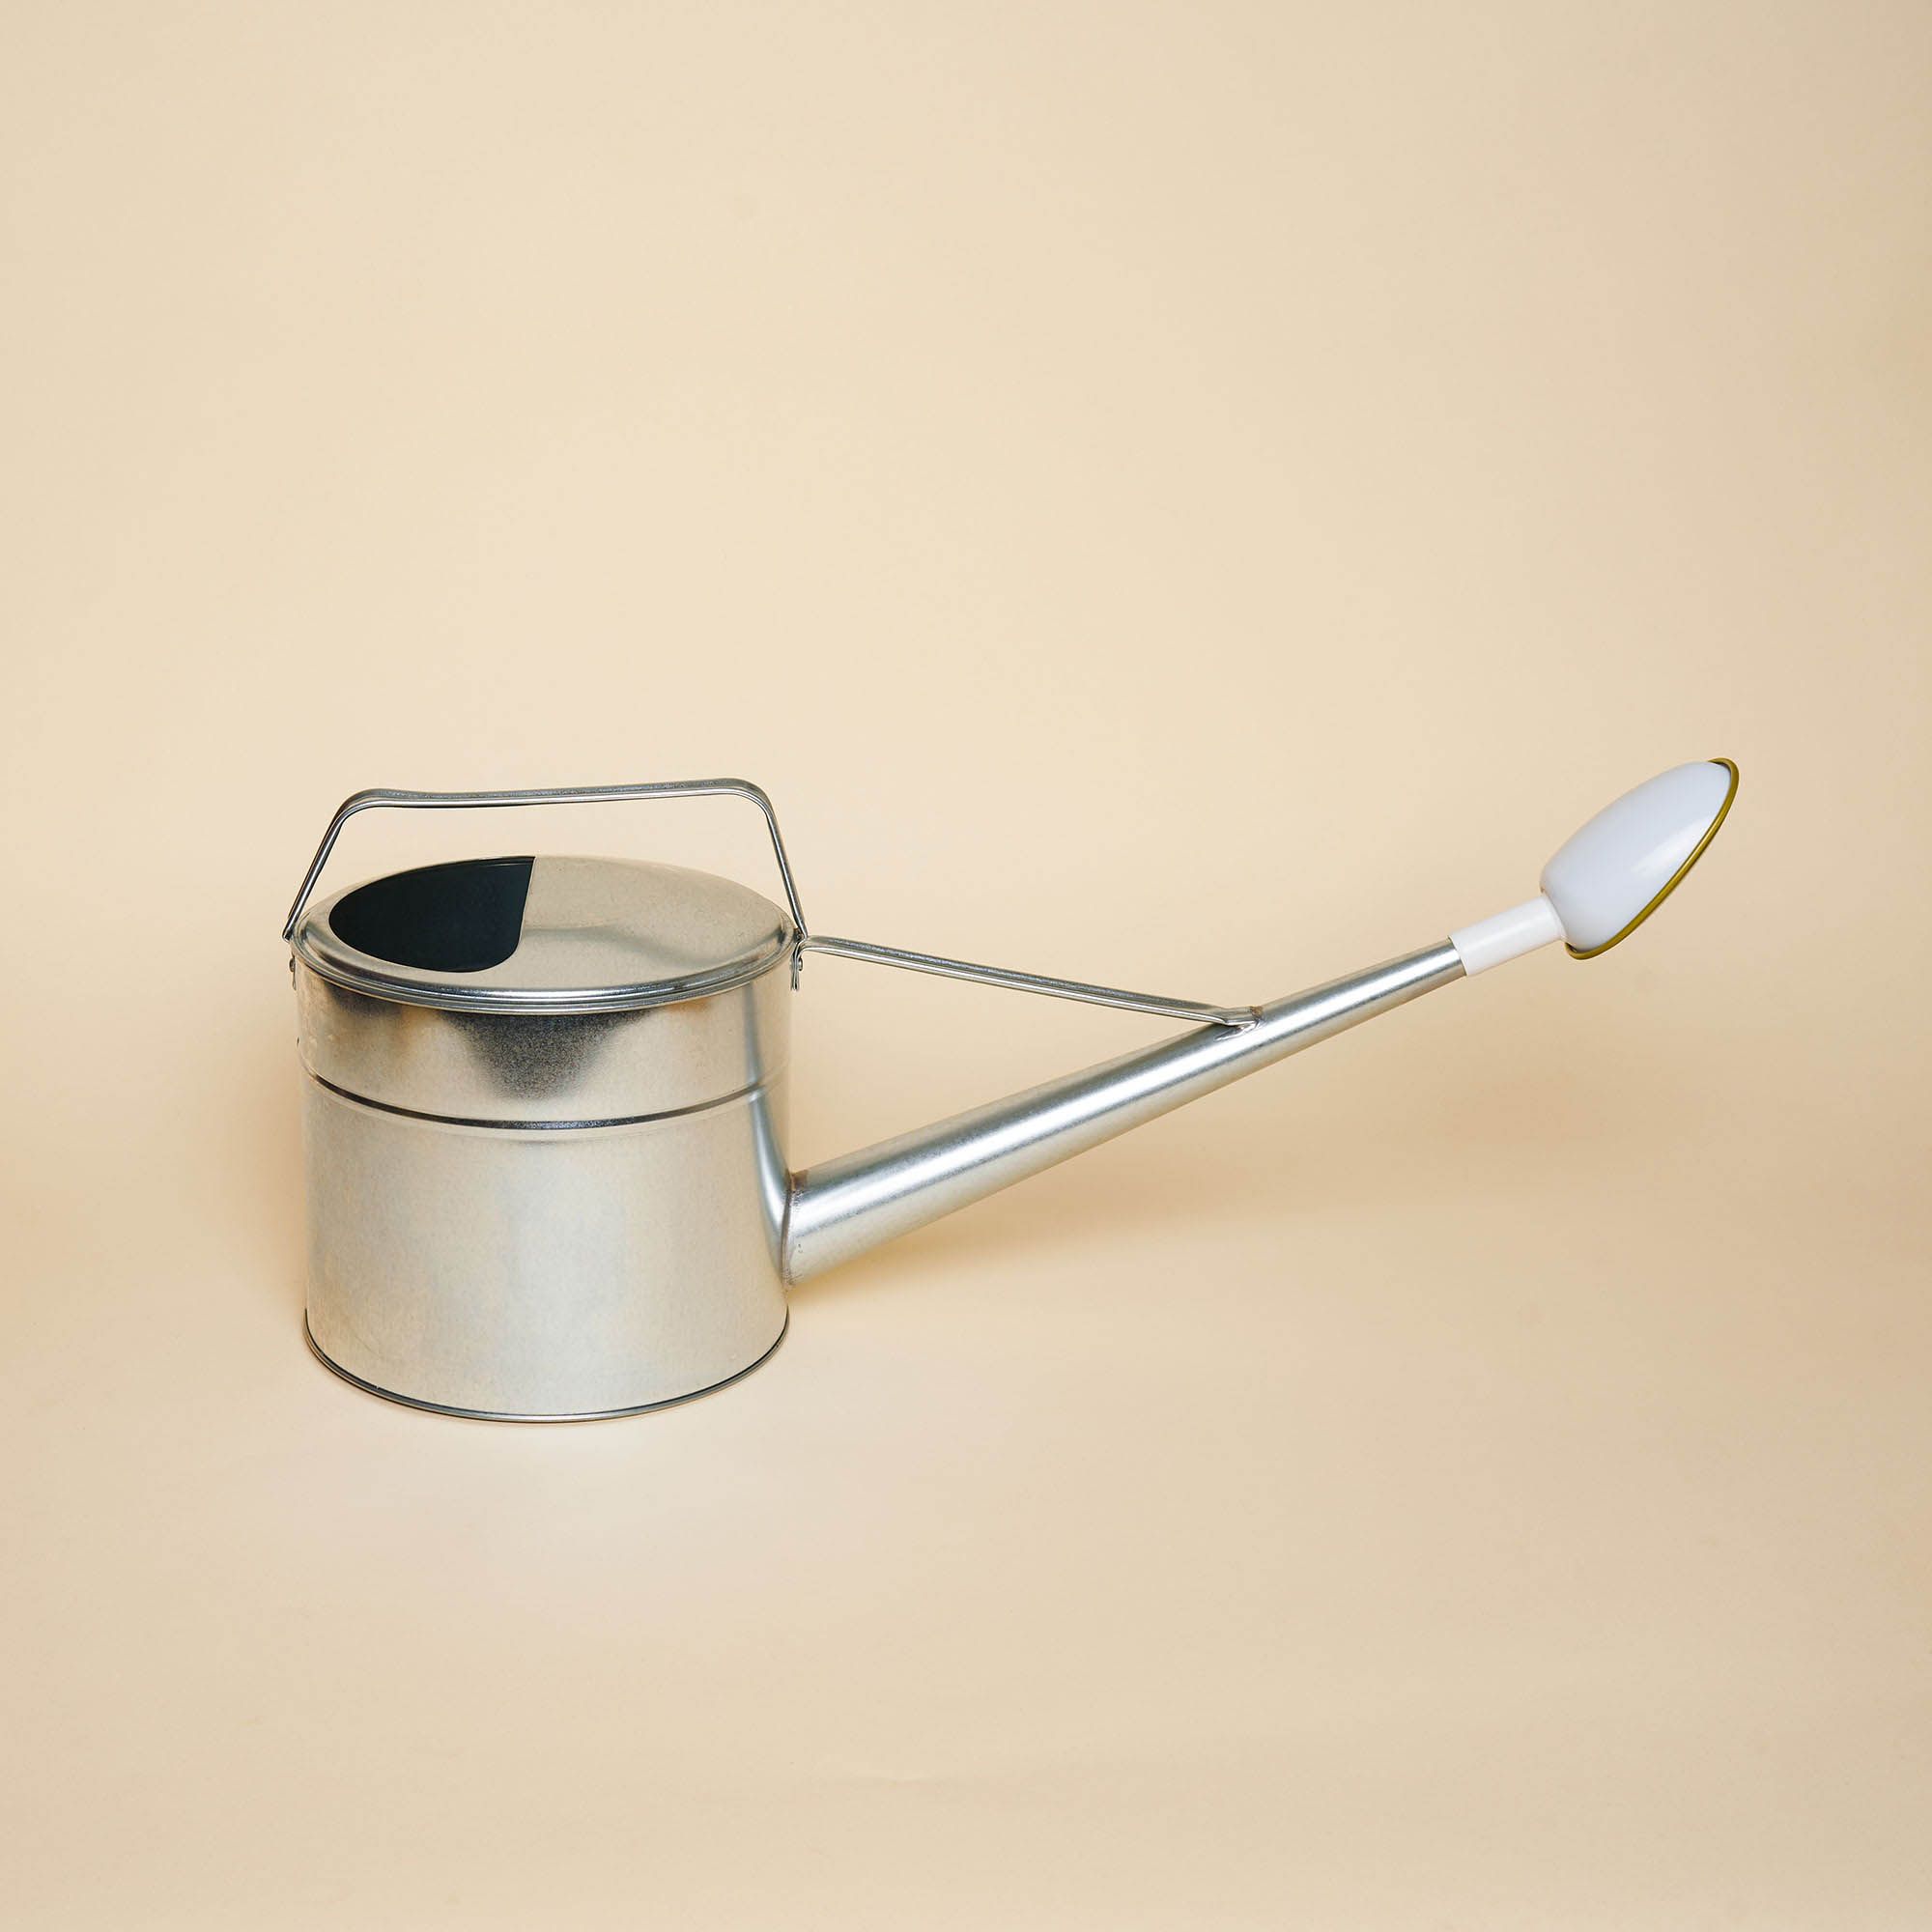 A iron-made watering can with a mustard colored nozzle.